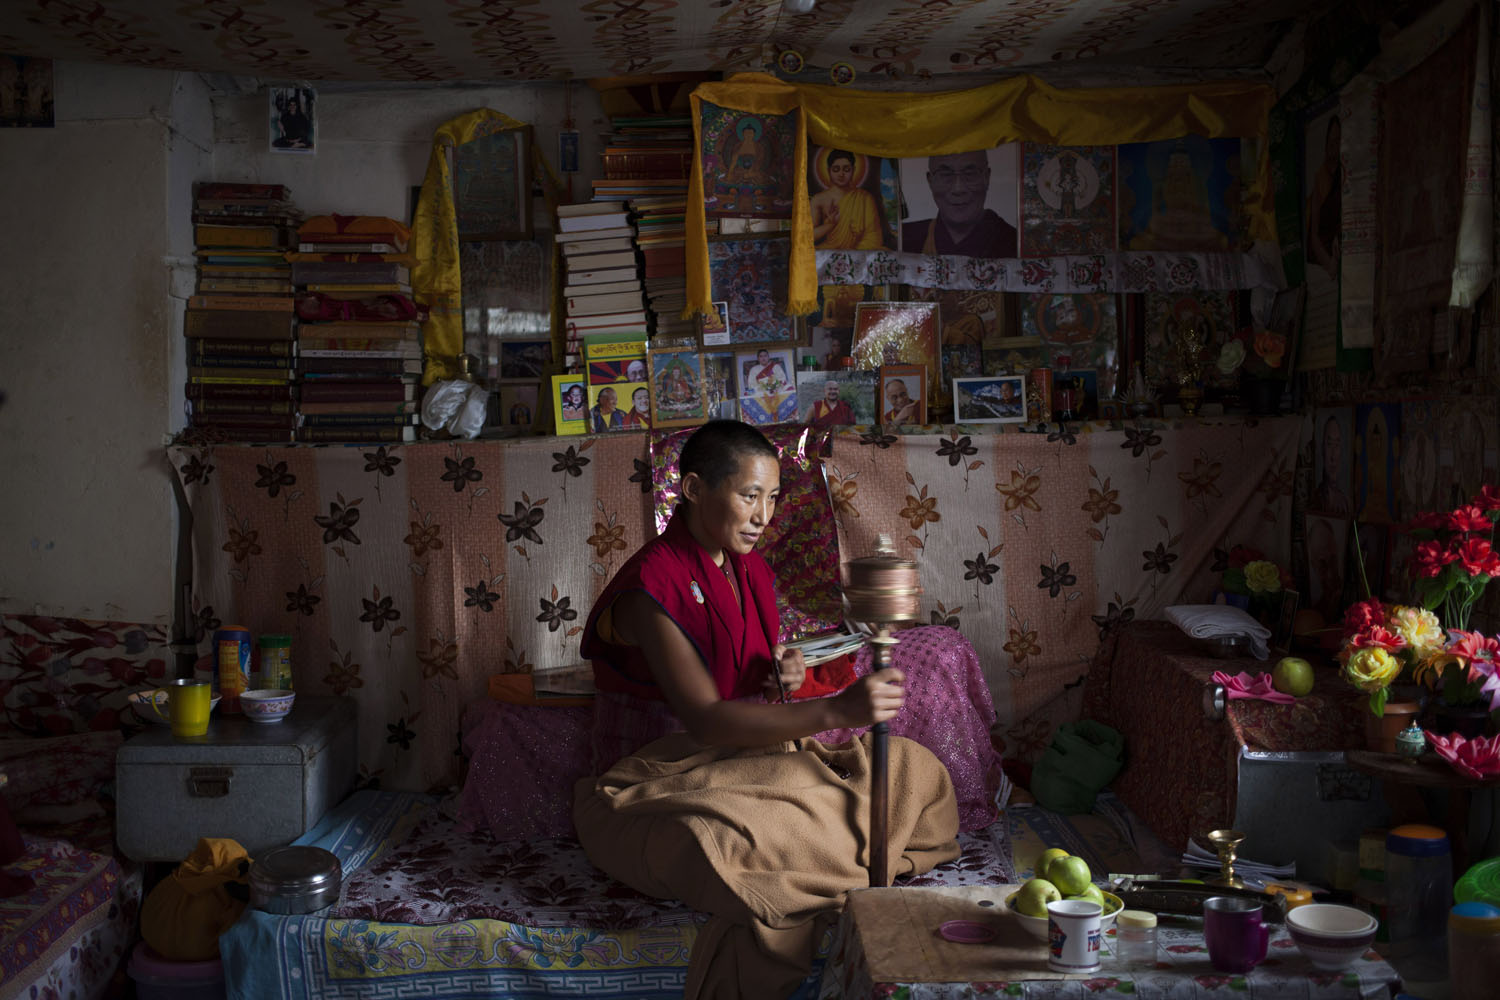 An exile Tibetan nun Namdak Choeying, 44, prays in her room that she shares with two other nuns in Dharmsala, India. Back home in Tibet she aspired to be a fully ordained nun and escaped to India in 2006. Her five siblings and aged parents live in Tibet and she dreams about being reunited with them. Choeying said she immerses herself in prayers to keep her mind occupied. Sept. 27, 2014.